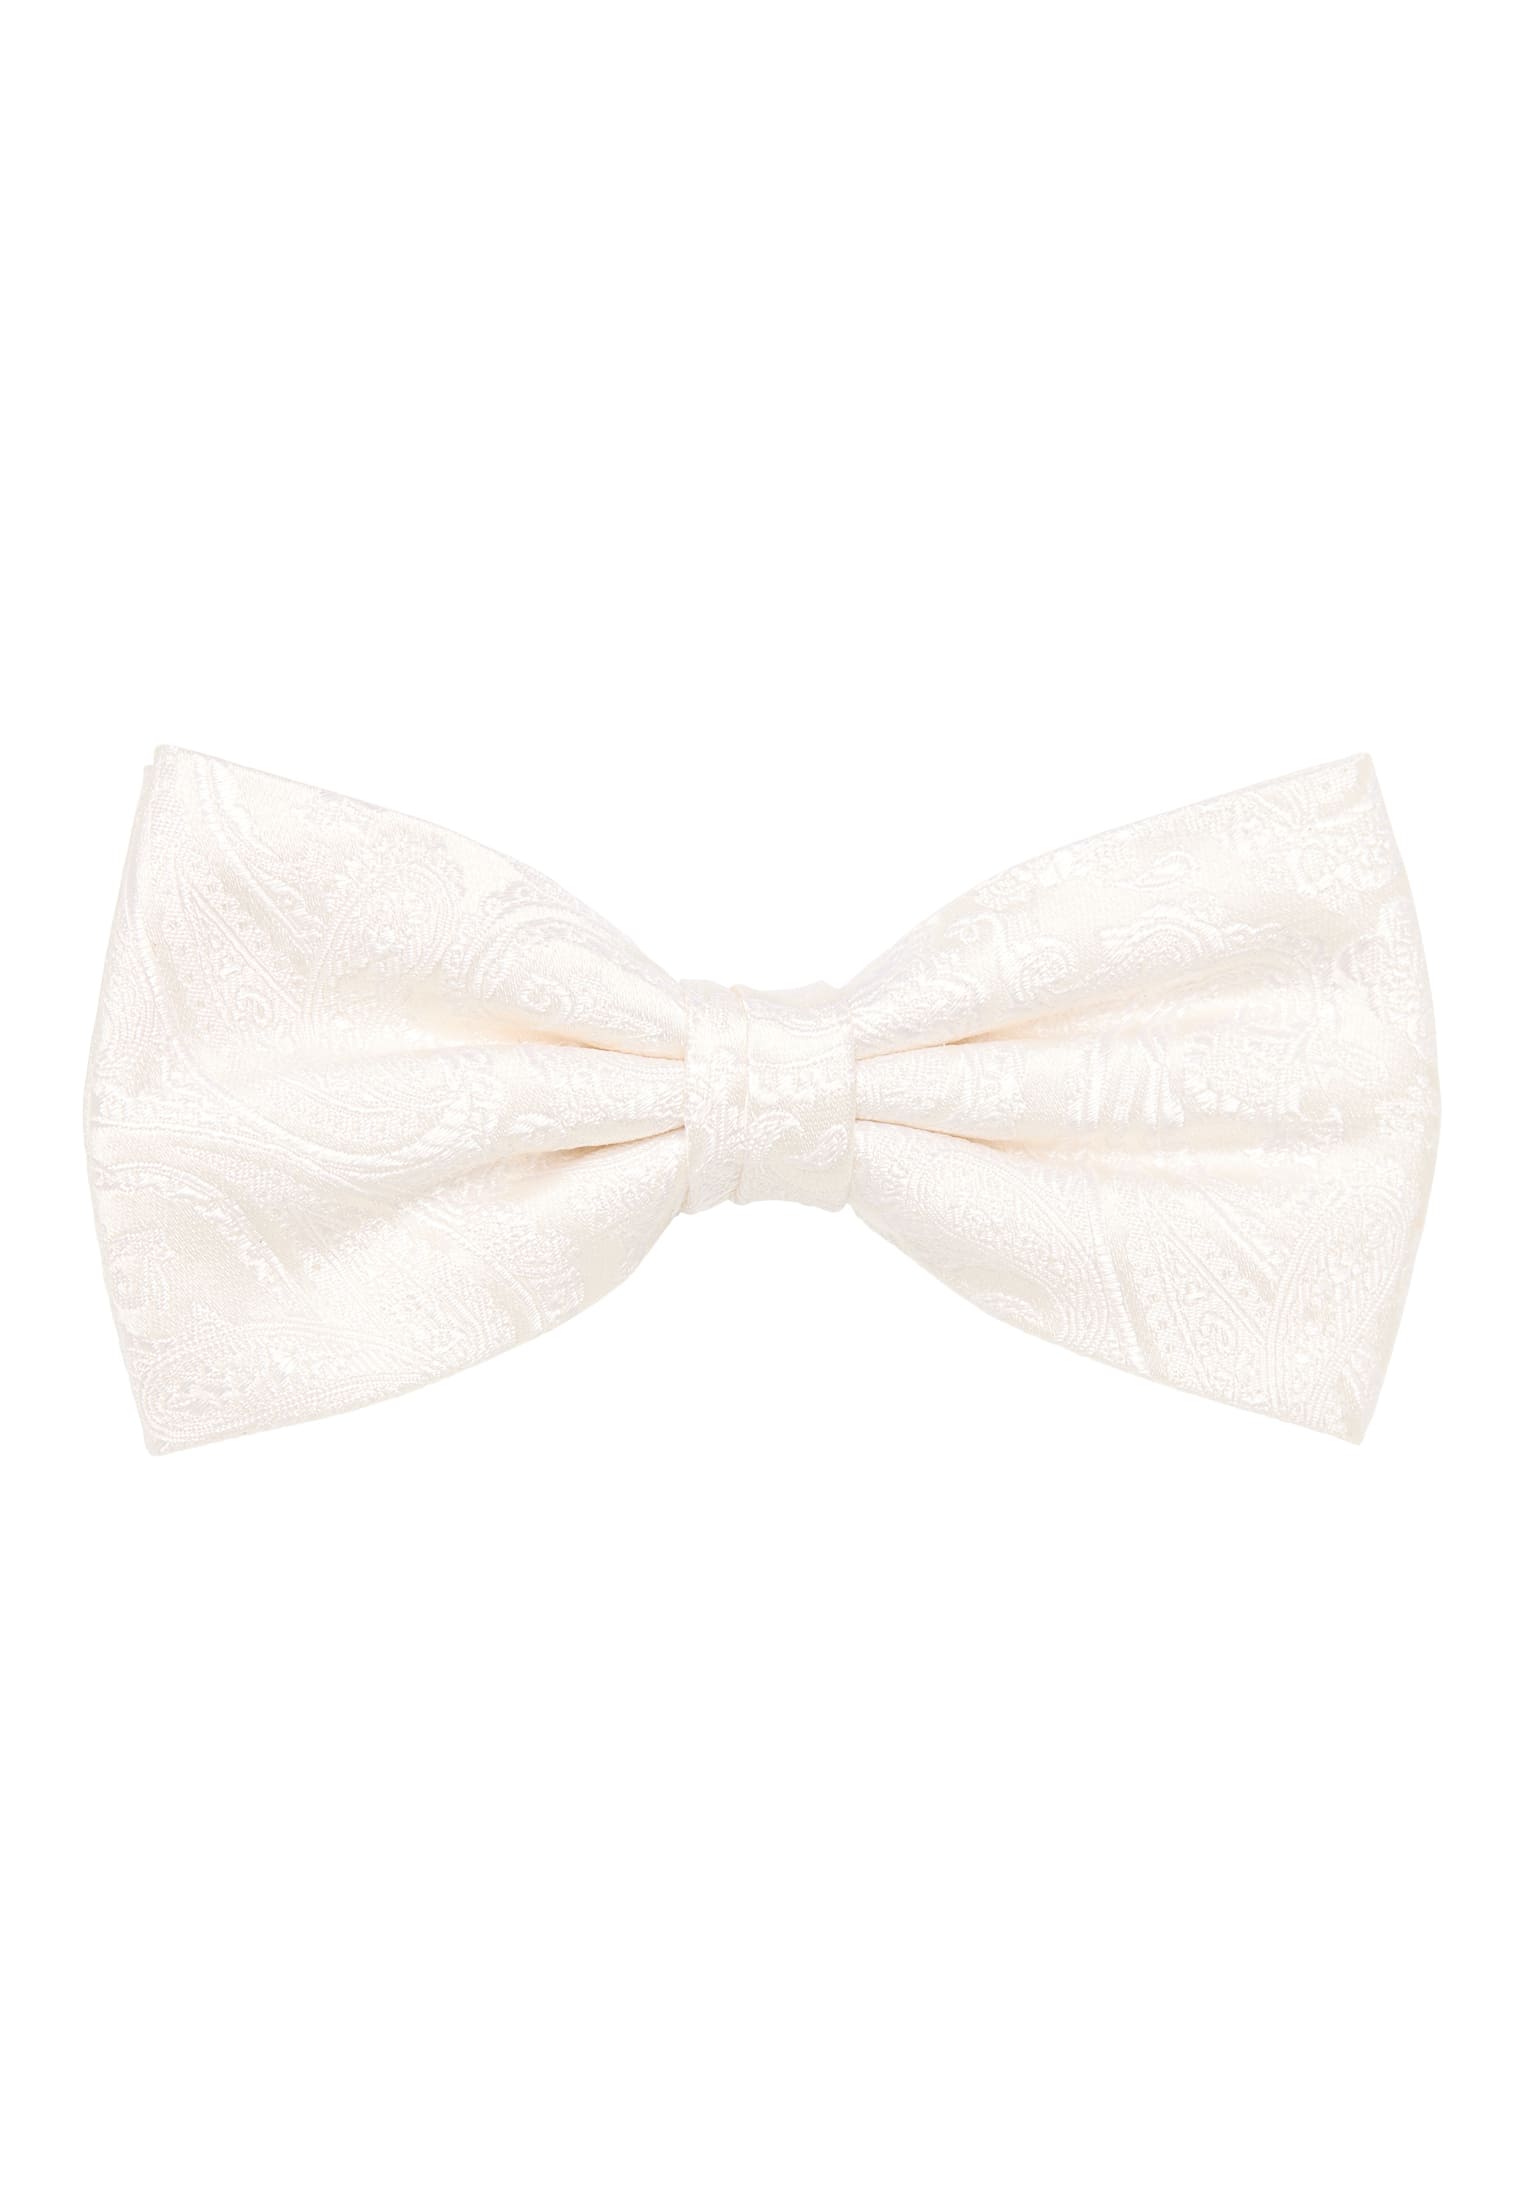 Bowtie in white patterned